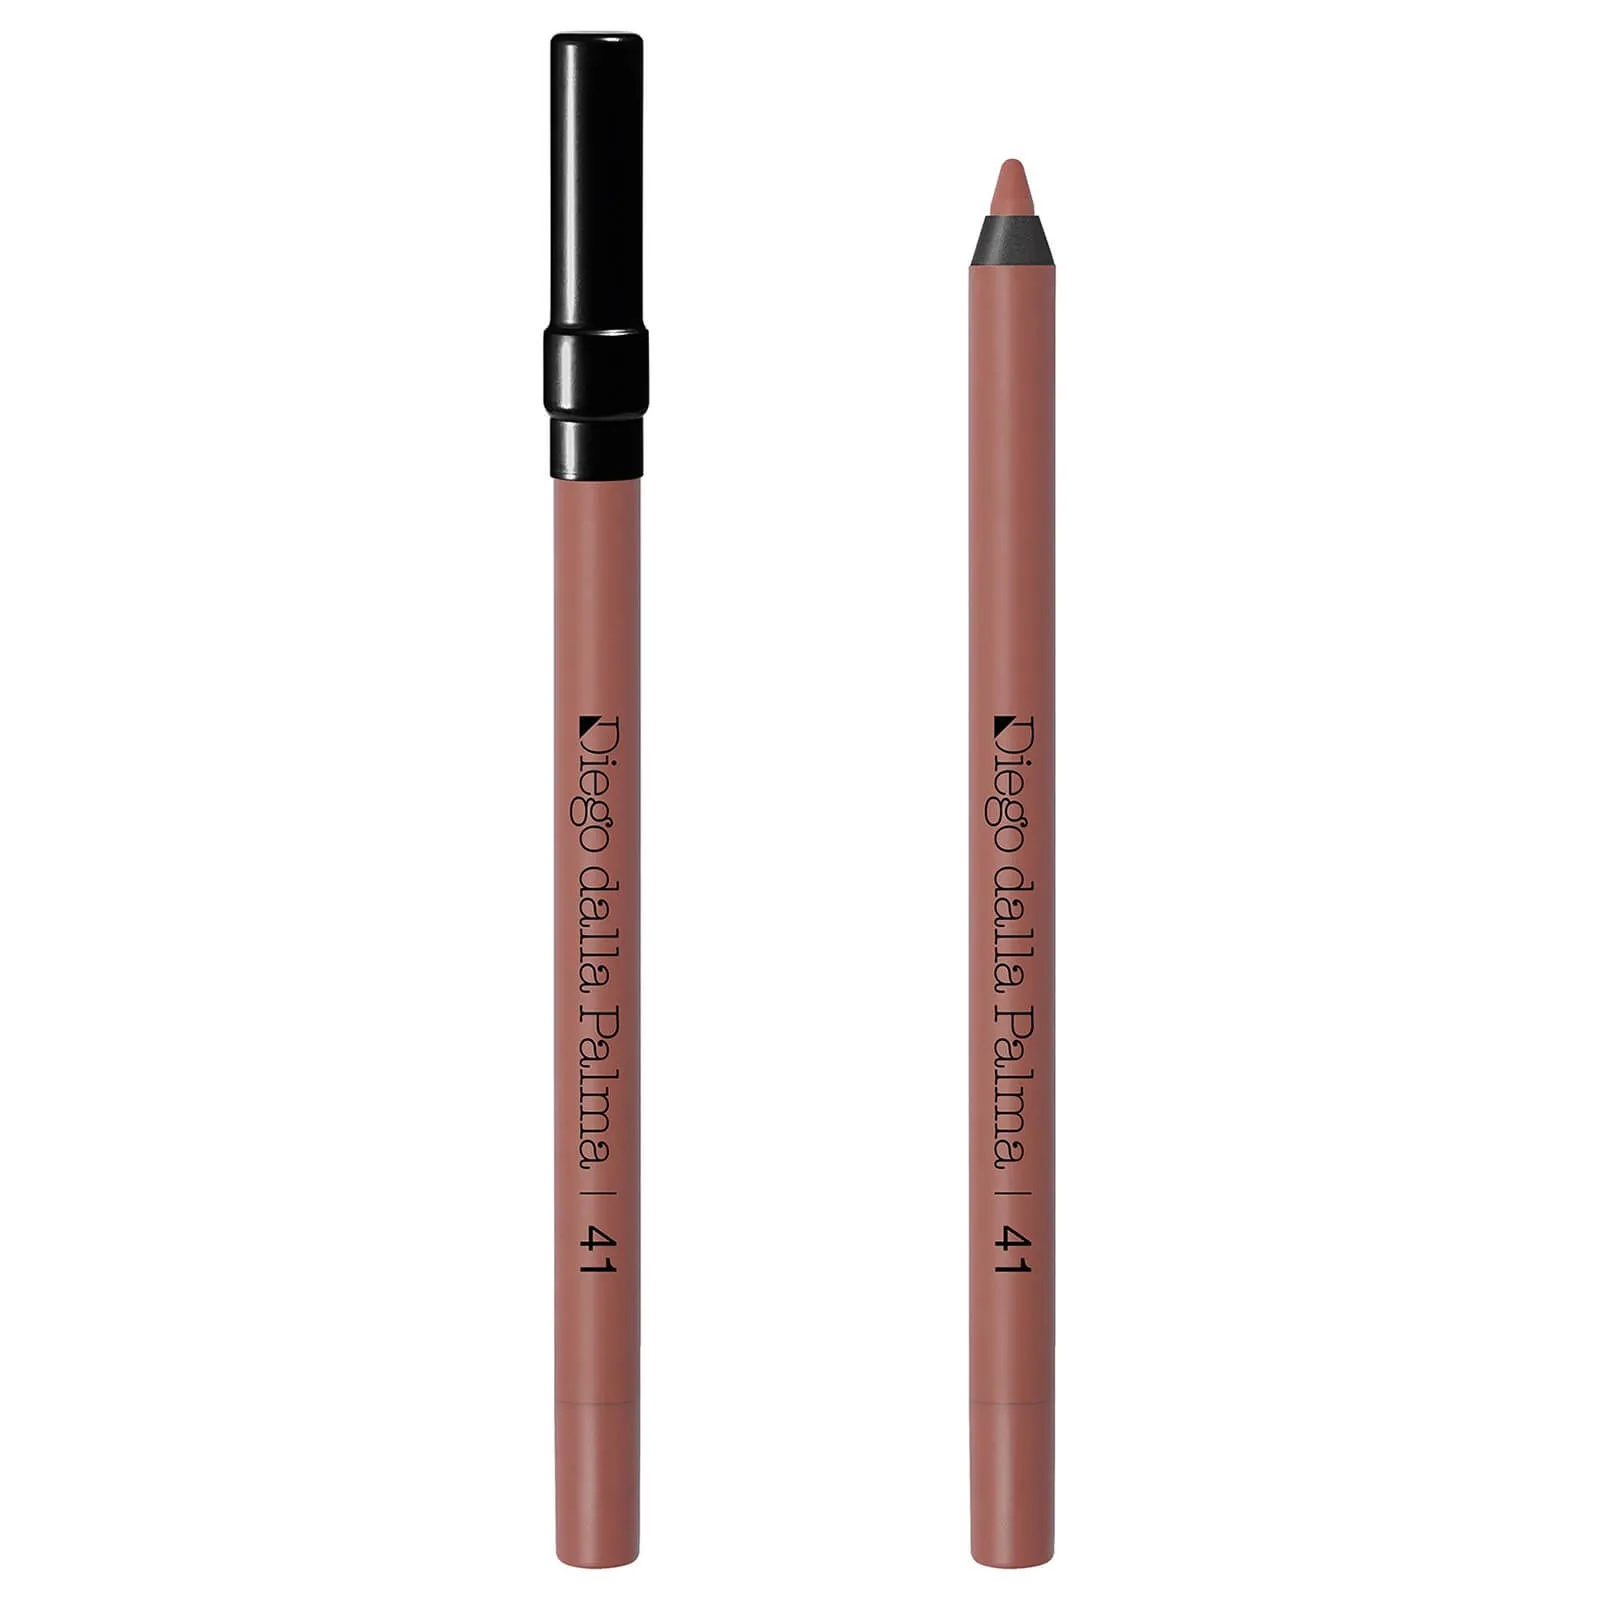  Makeupstudio Stay On Me Lip Liner (Various Shades) - 41 Nude